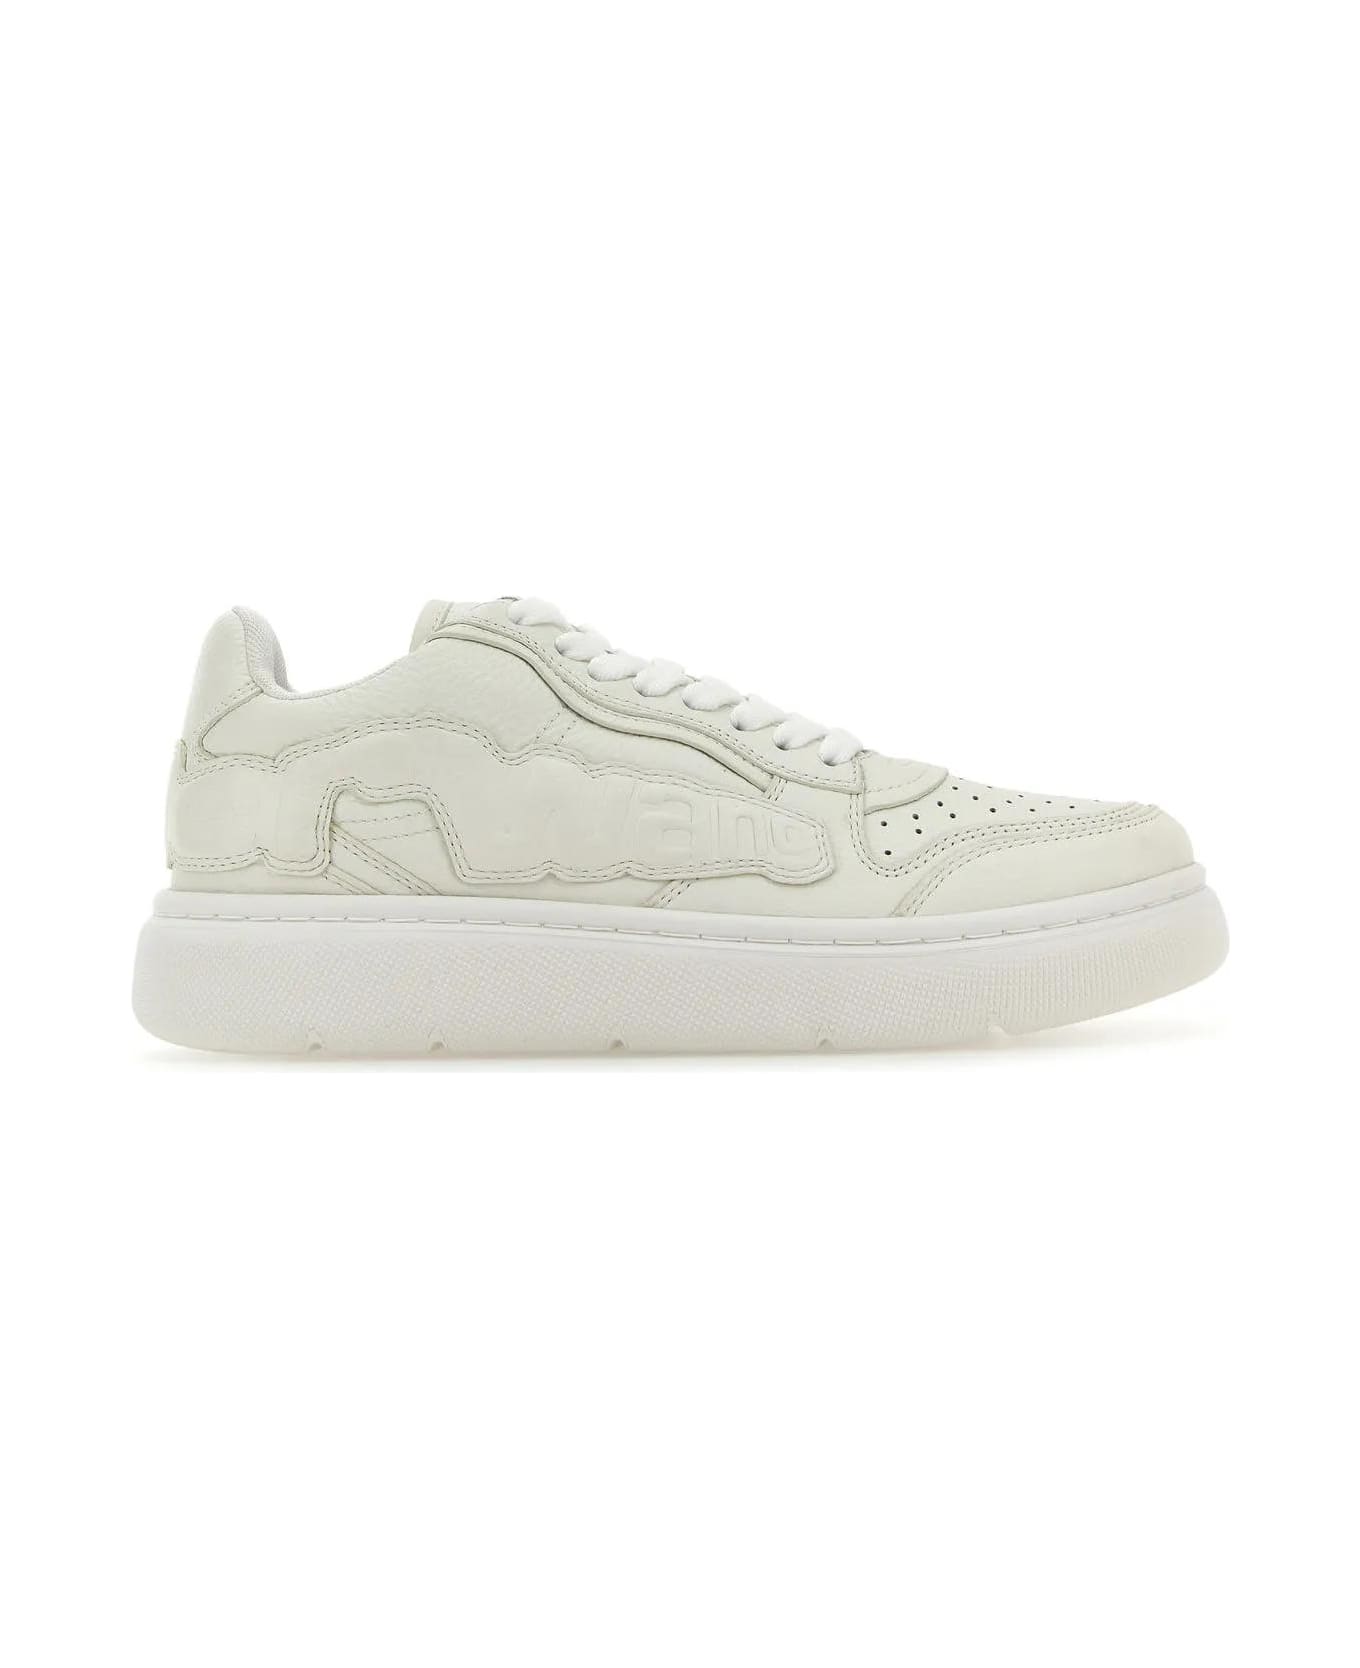 Alexander Wang White Leather Puff Sneakers - Optic White